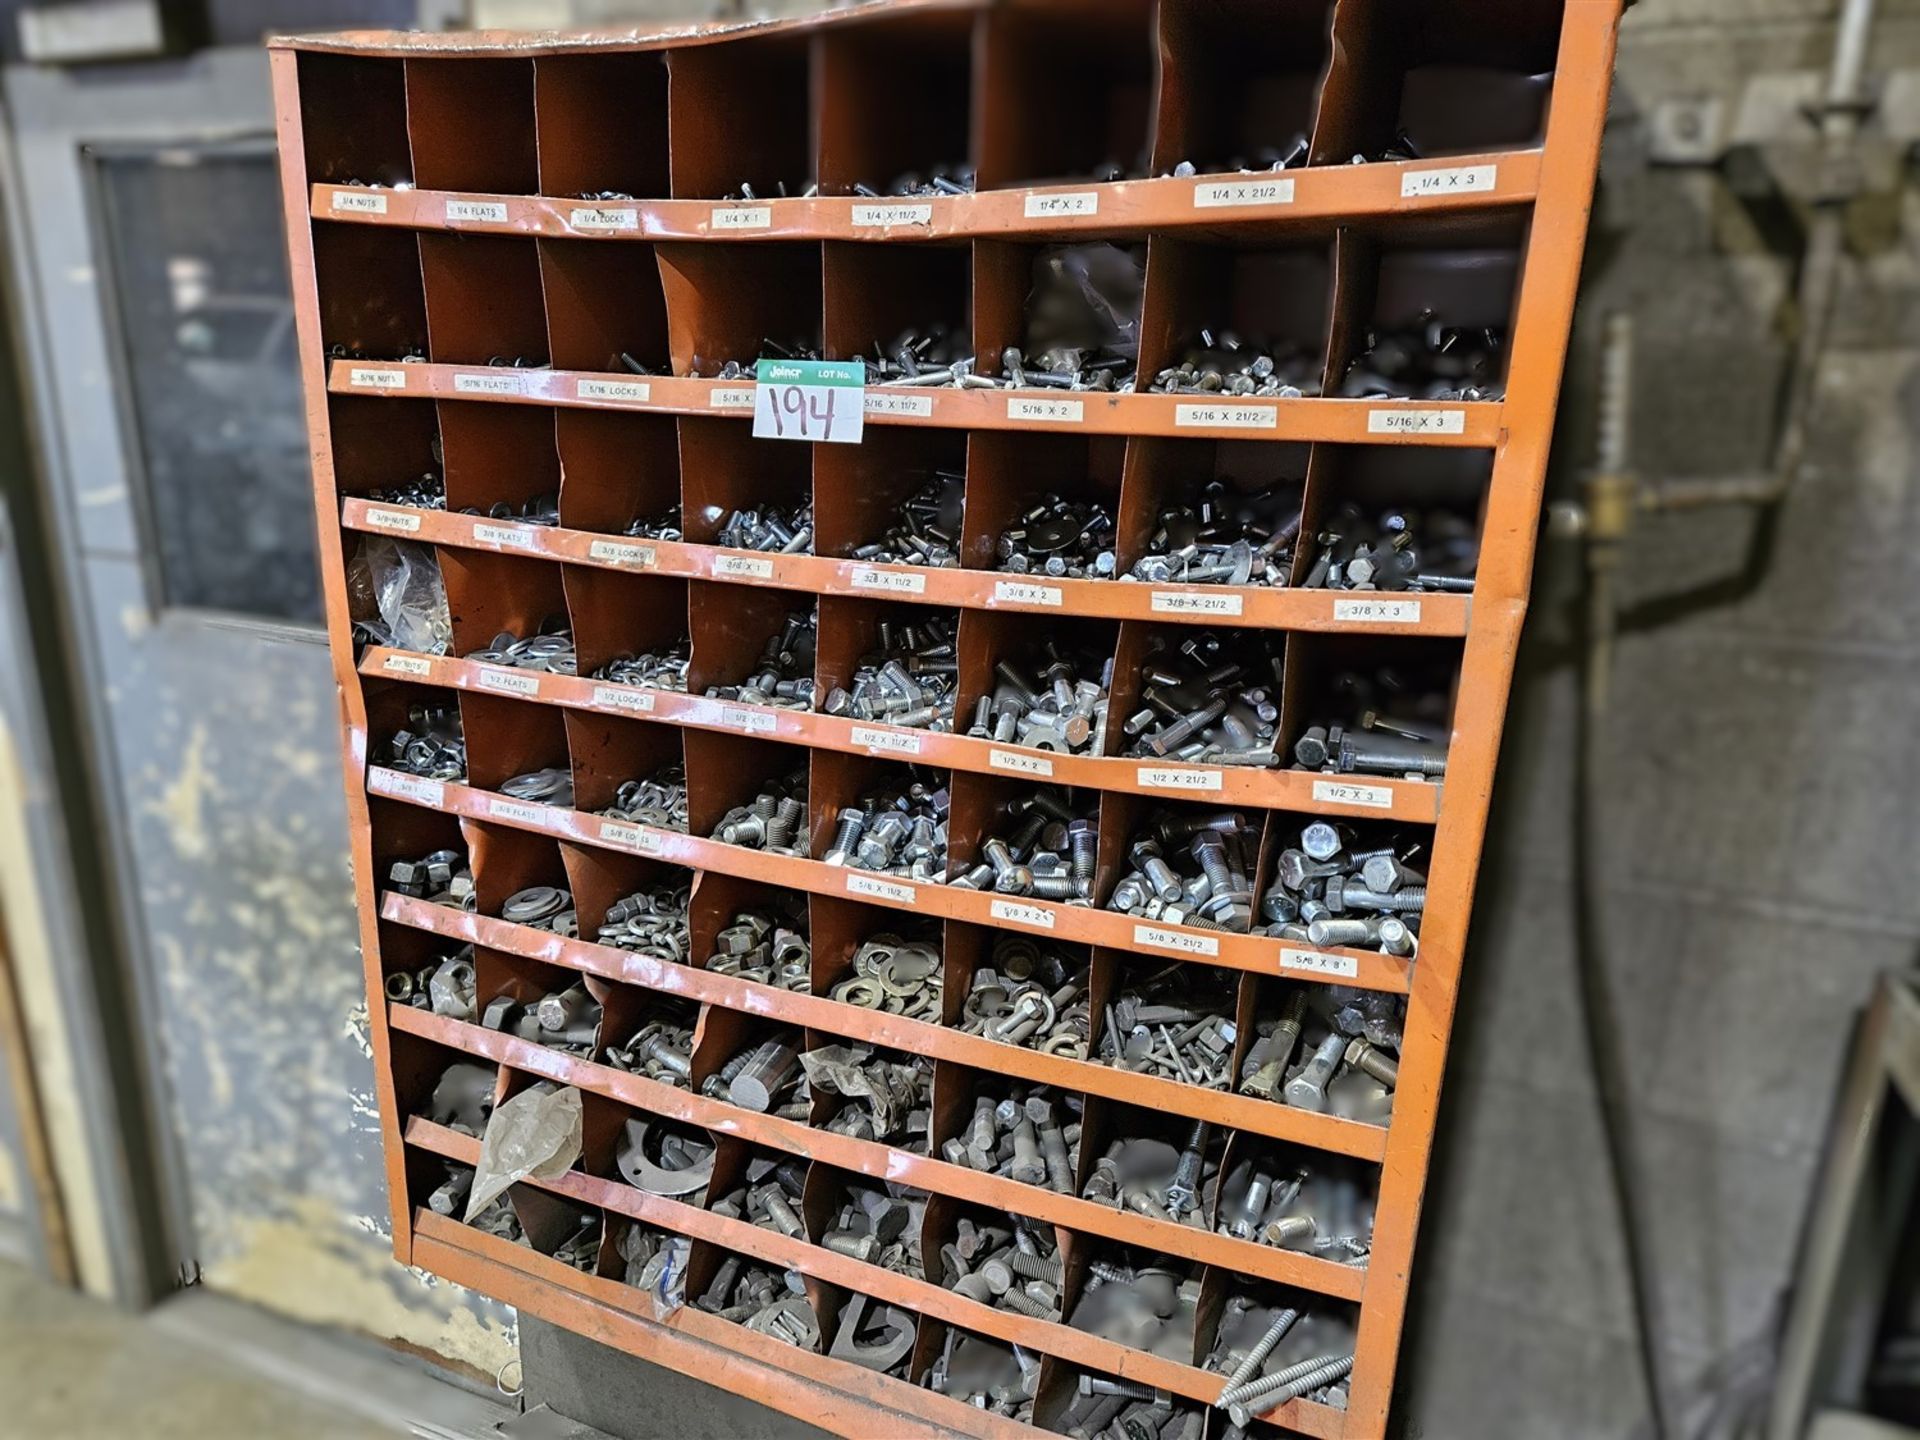 STORAGE SHELF W/ASST. NUTS, BOLTS AND WASHERS